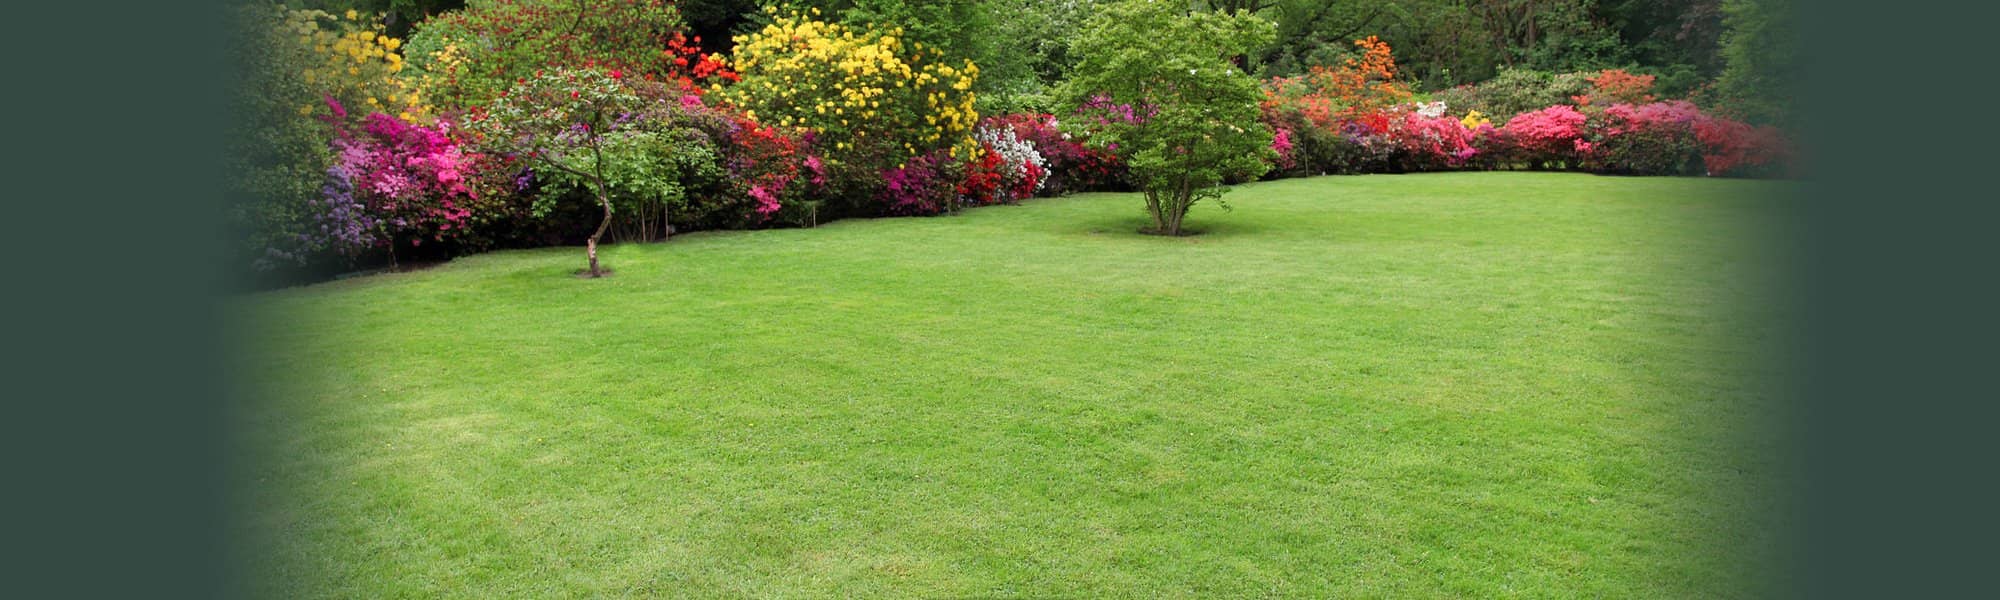 Residential Lawn Care & Turf Management in St. Louis